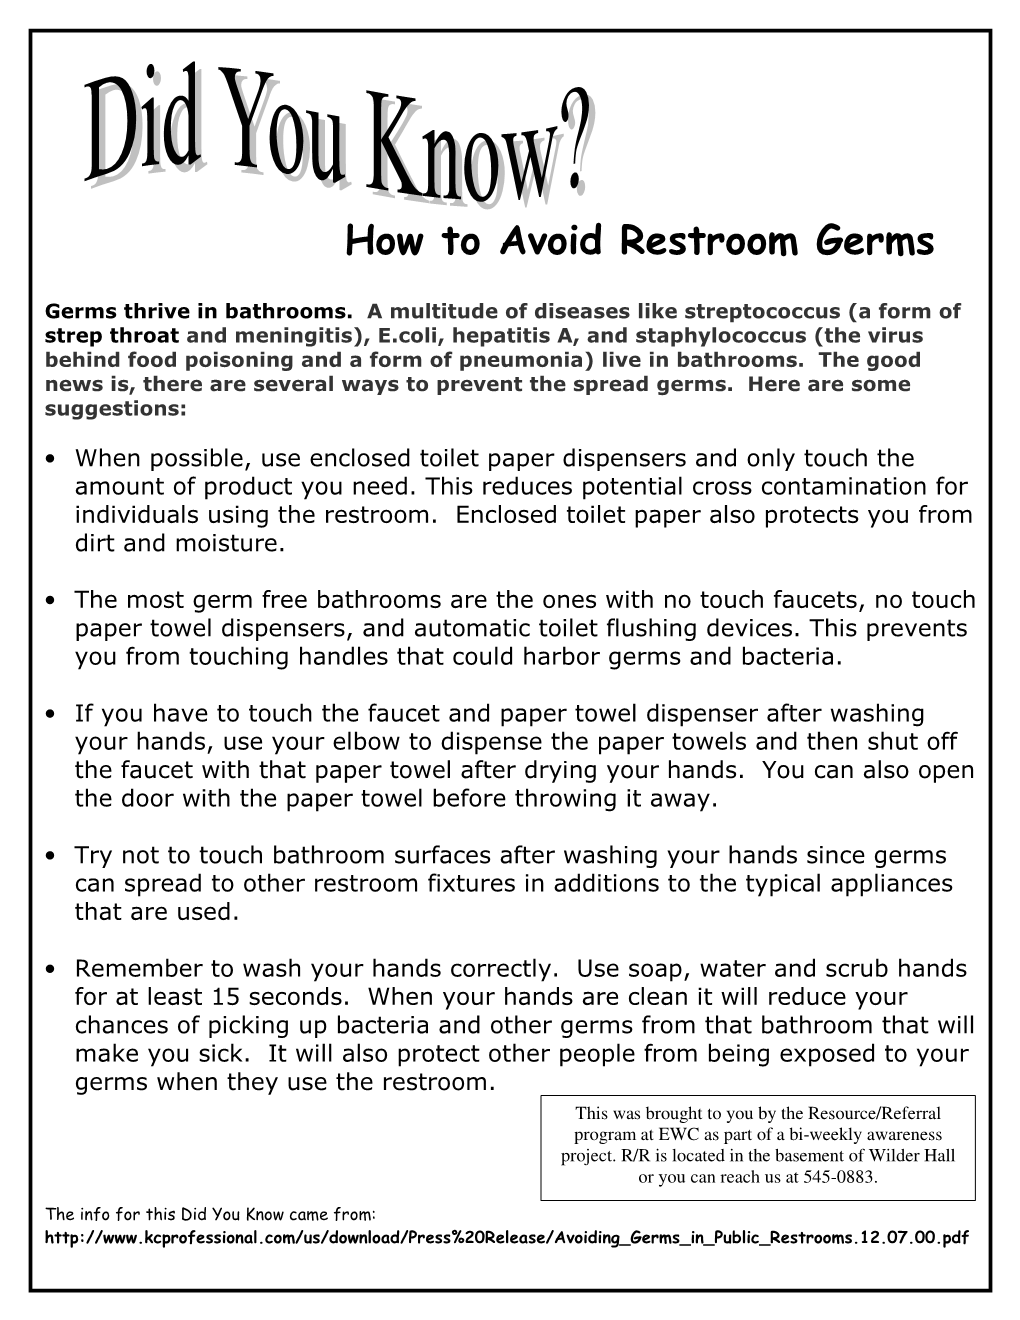 How to Avoid Restroom Germs